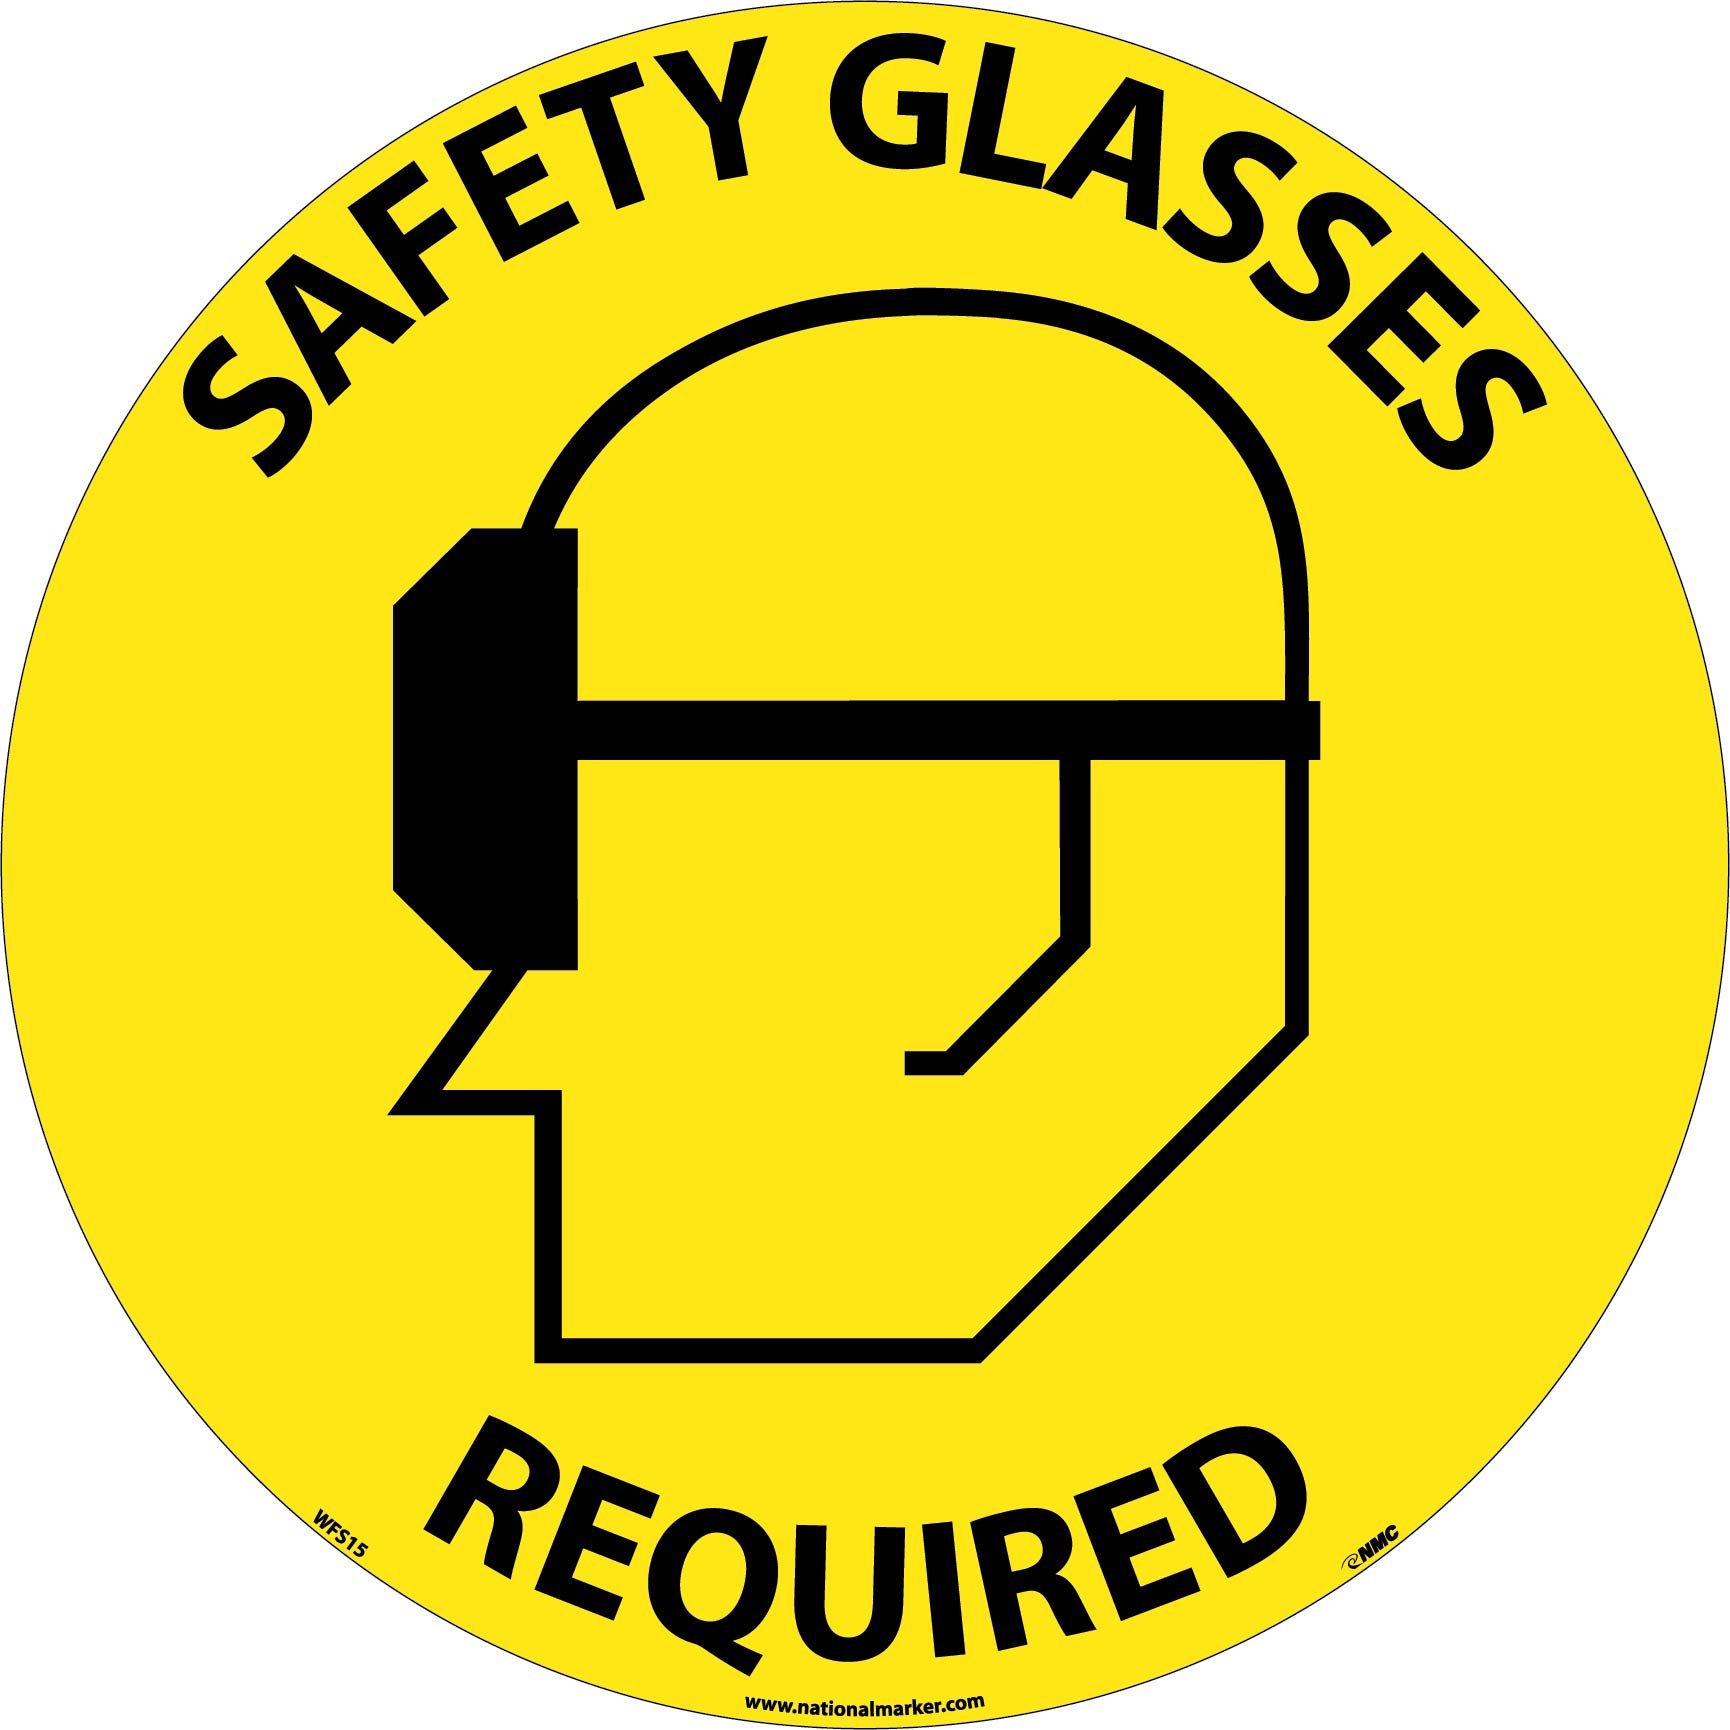 Wear Eye Protection Safety Glasses Clipart - The Cliparts